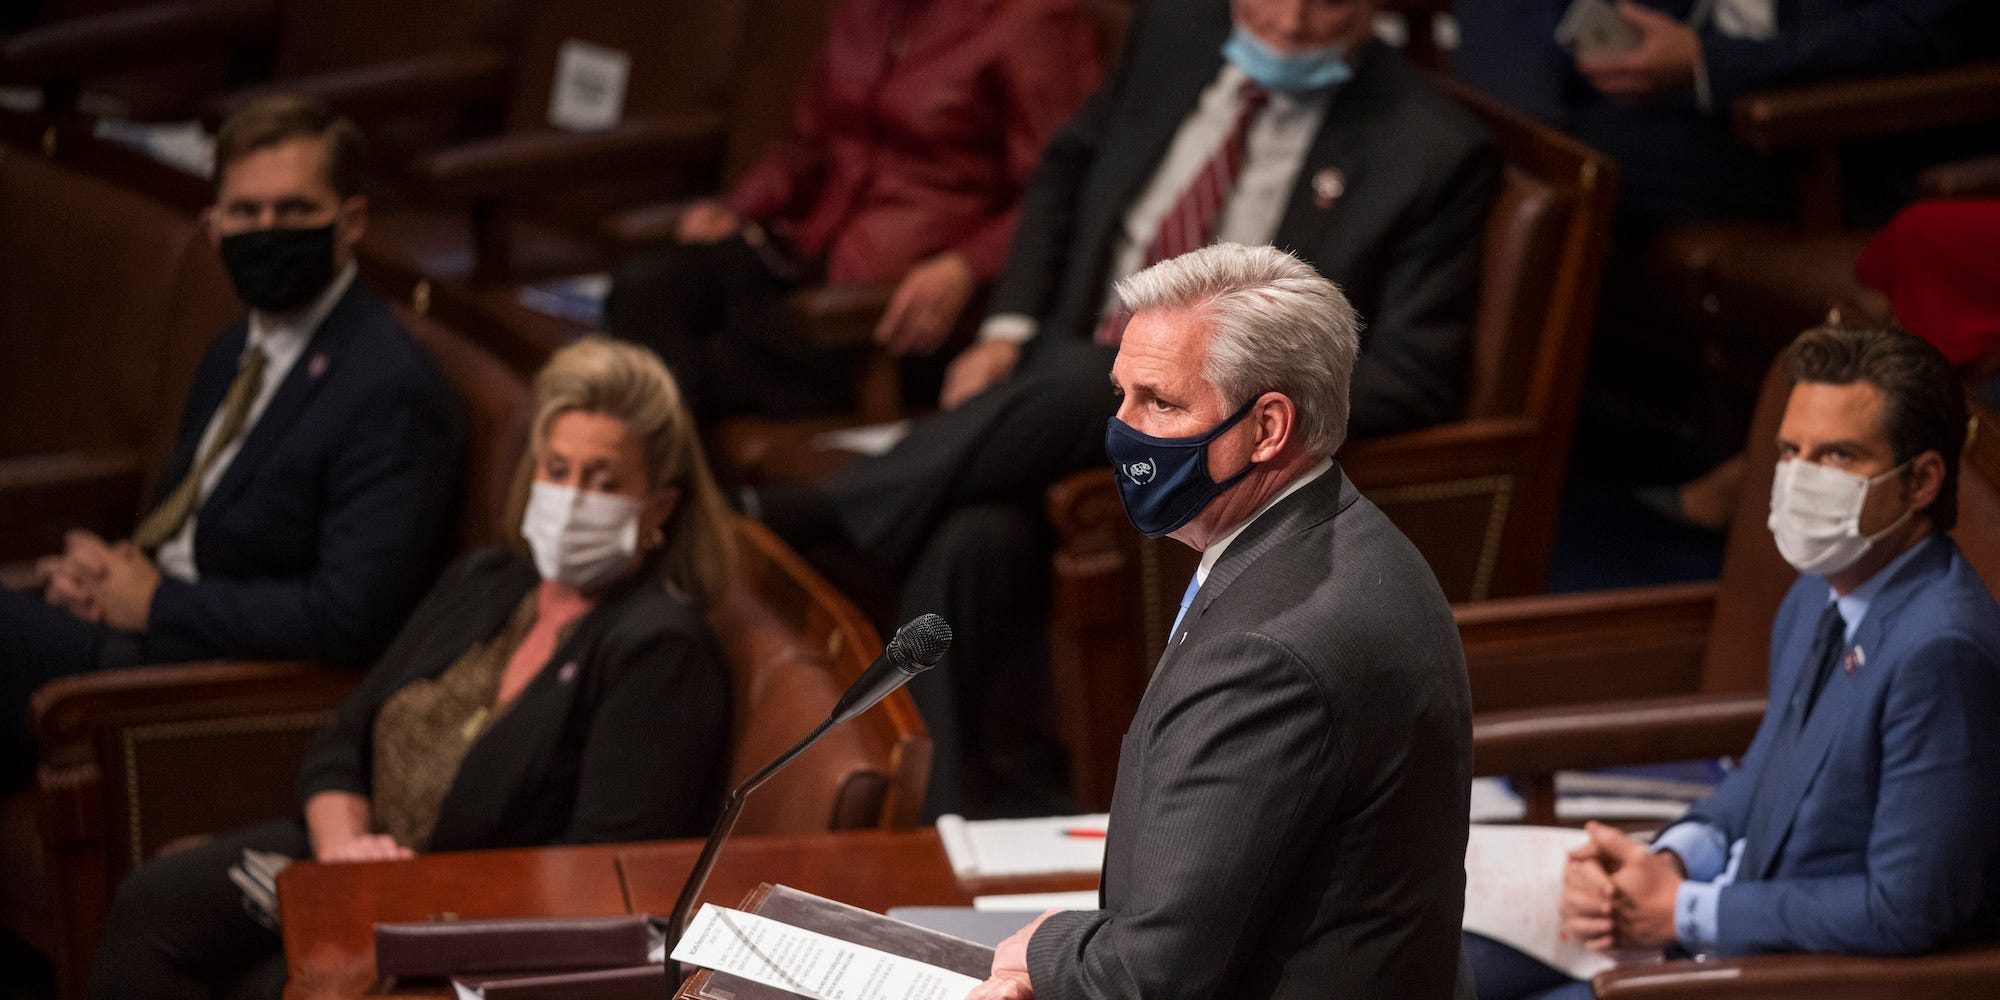 House Minority Leader Kevin McCarthy addresses the House Chamber on January 6, 2021.